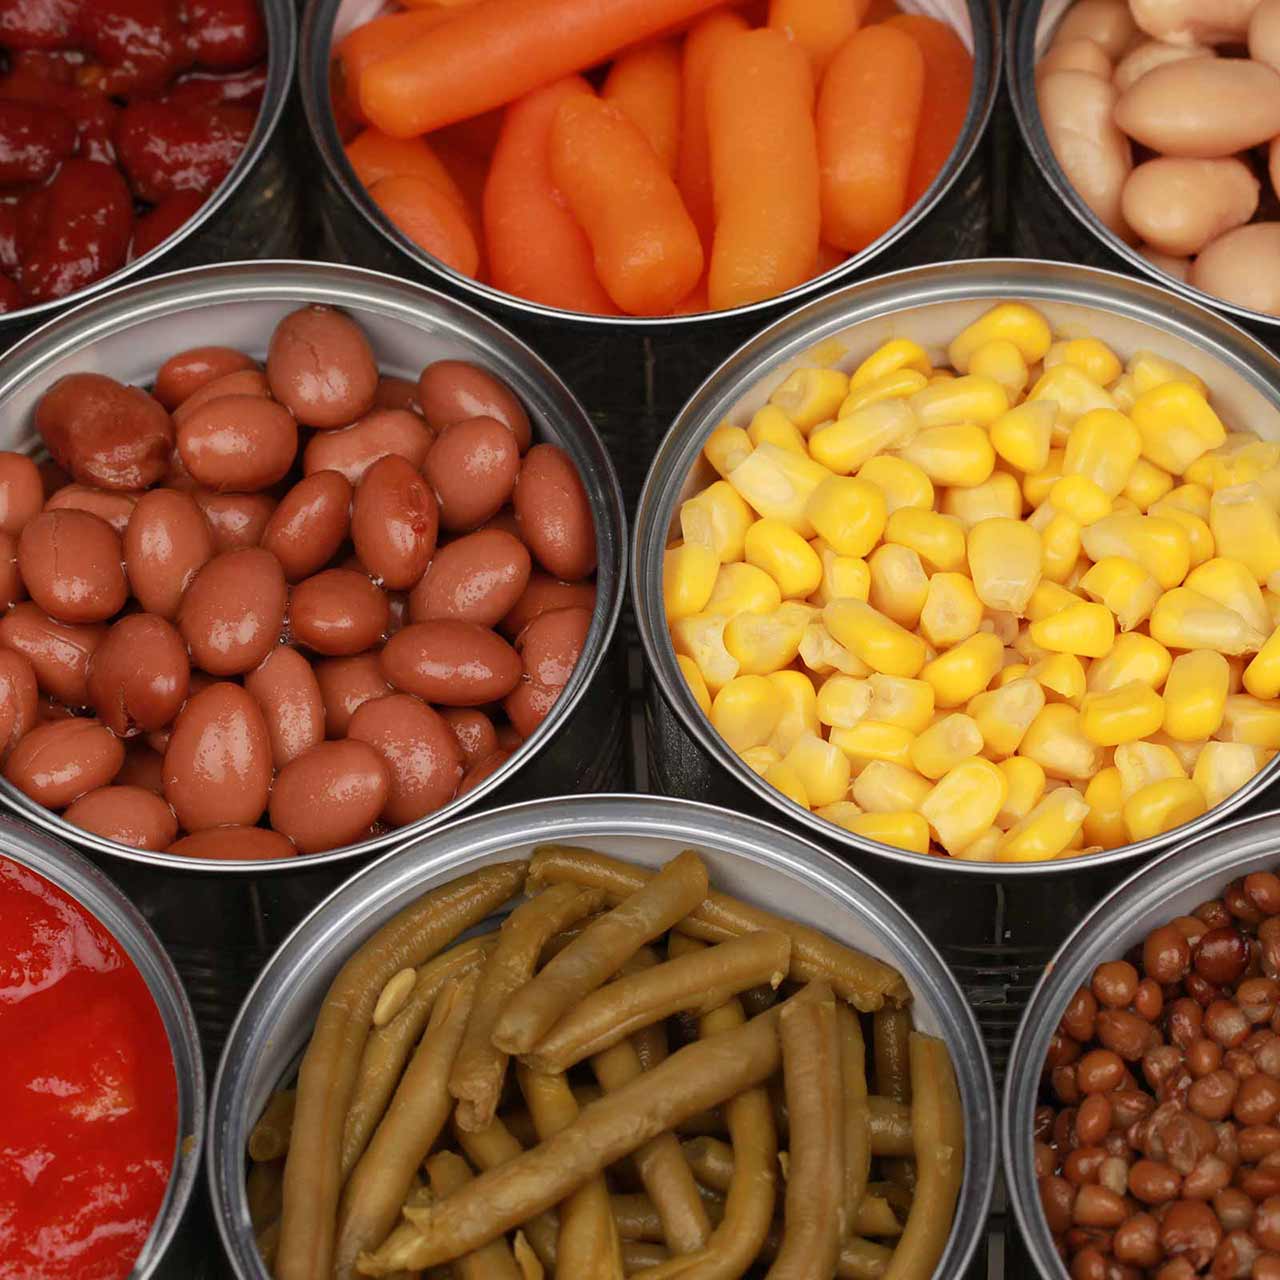 Processed Canned Foods